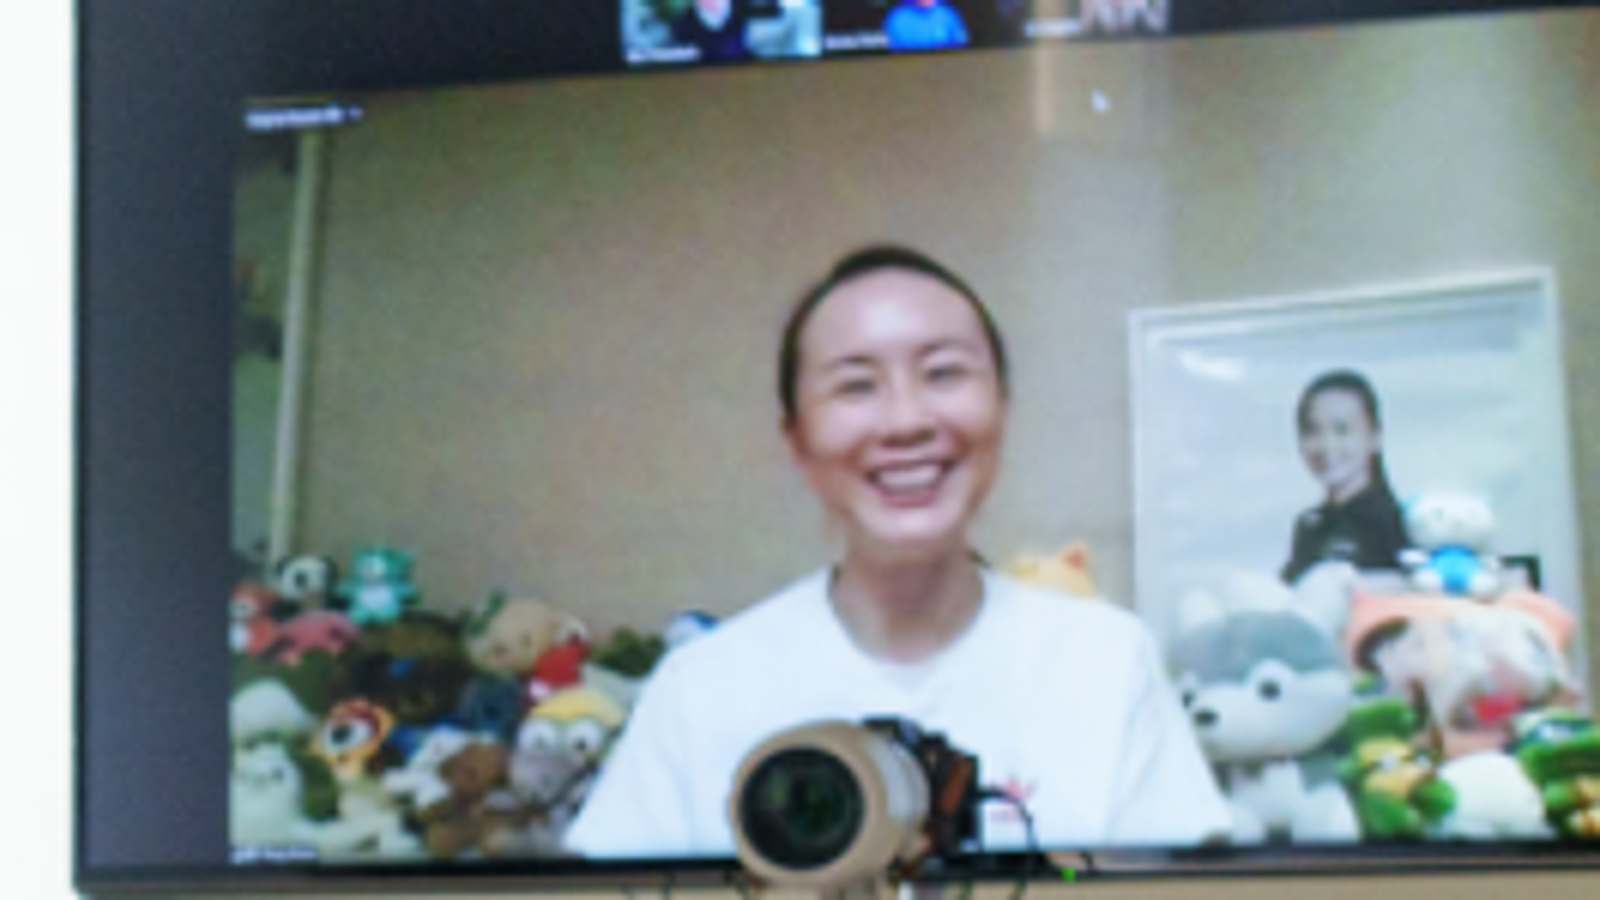 Peng Shuai: Chinese tennis player tells Olympics boss she is safe and well in video call